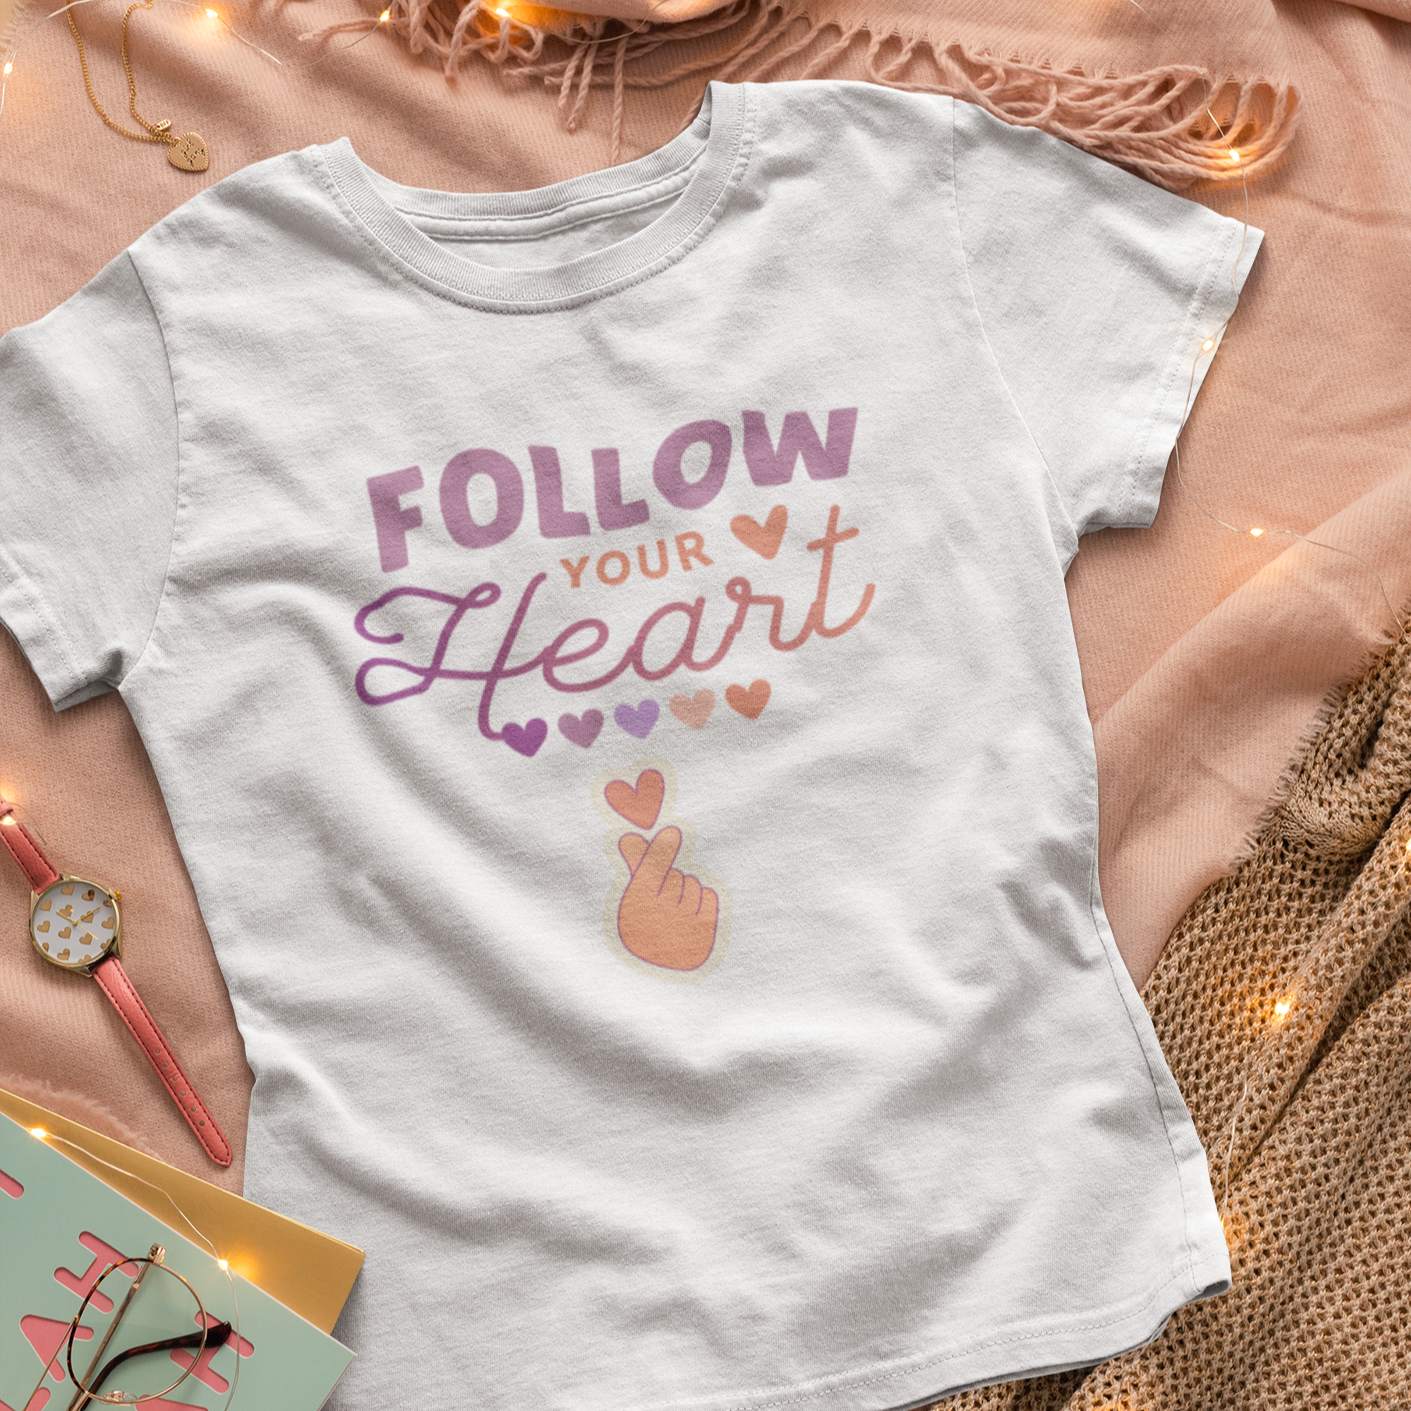 Story of Awakening Lifestyle Community Spirituality Relationships Love Light Meditation Oneness Earth Balance Healing Shop Store Charity Tree Nature Read Write T shirt Tops Tees Clothing Women Horoscope Organic Cotton Follow Your Heart Valentines Day Quote